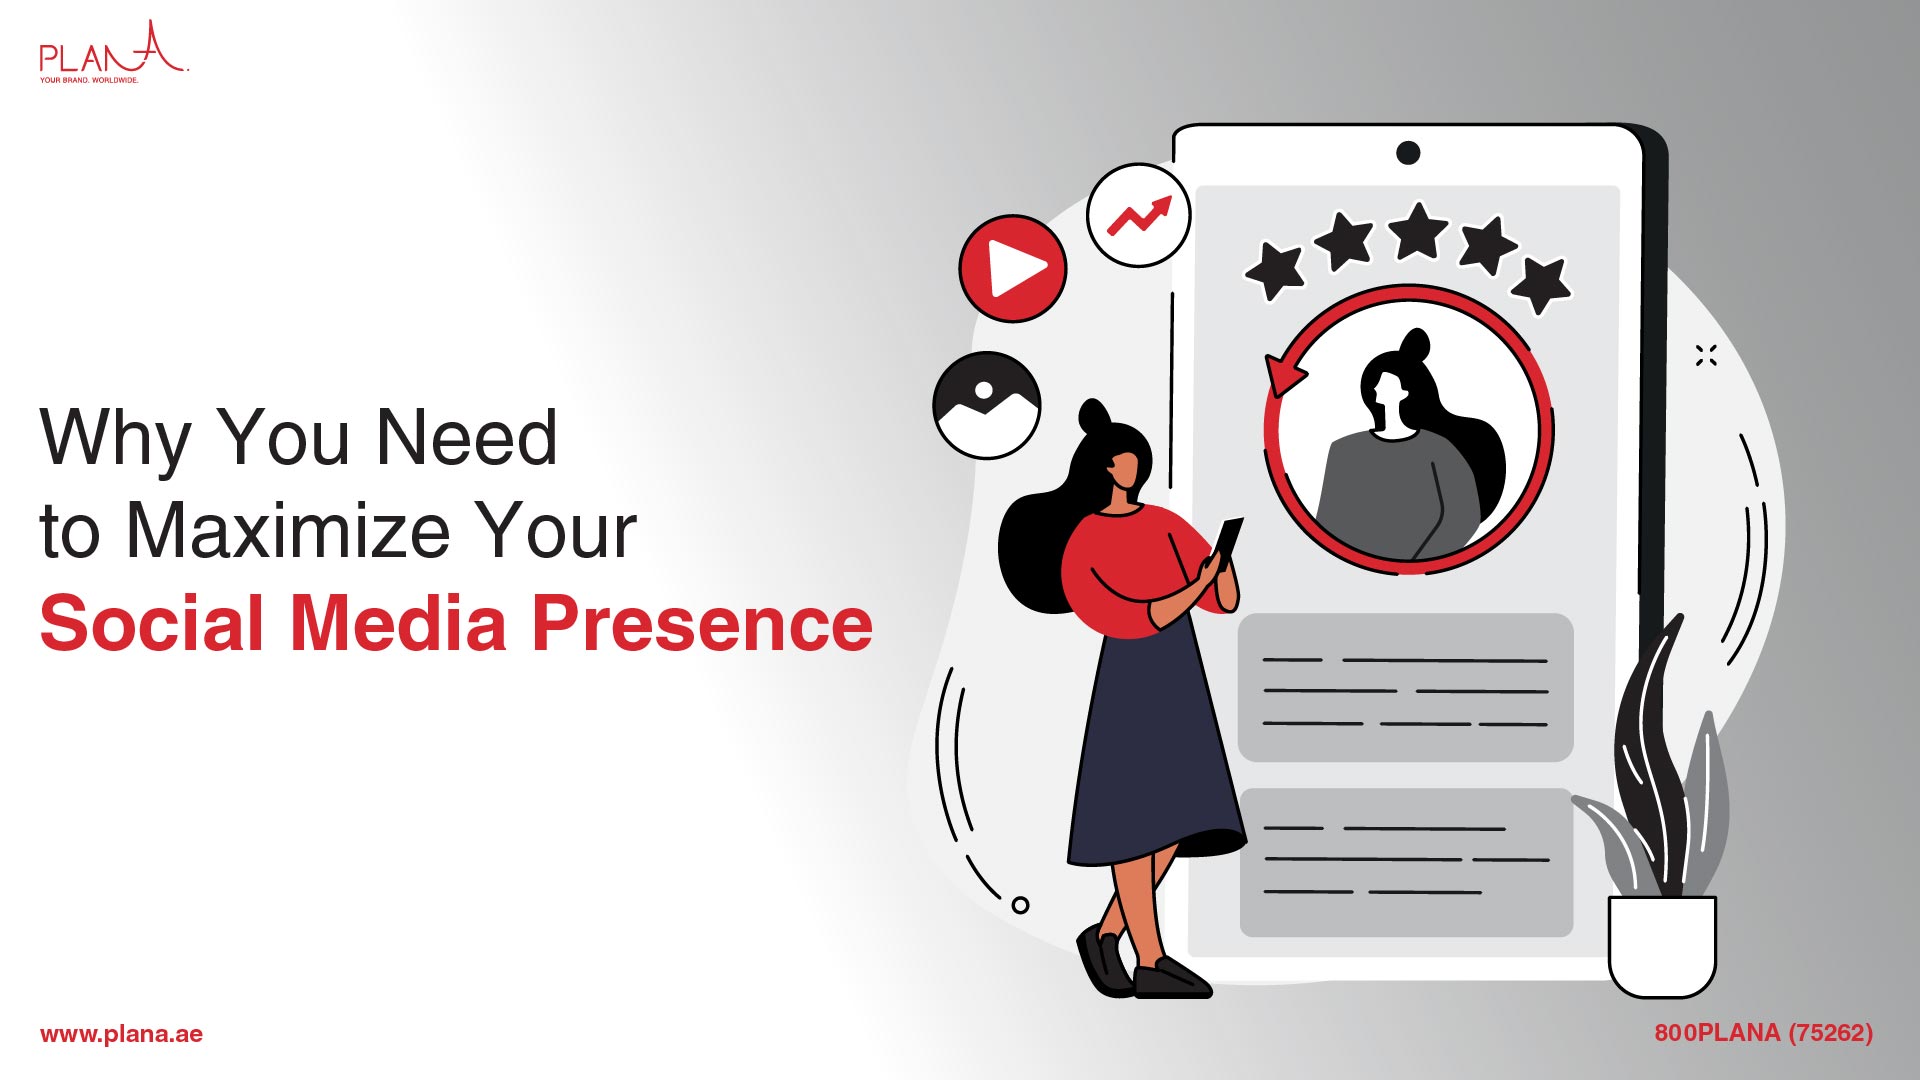 Why You Need to Maximize Your Social Media Presence